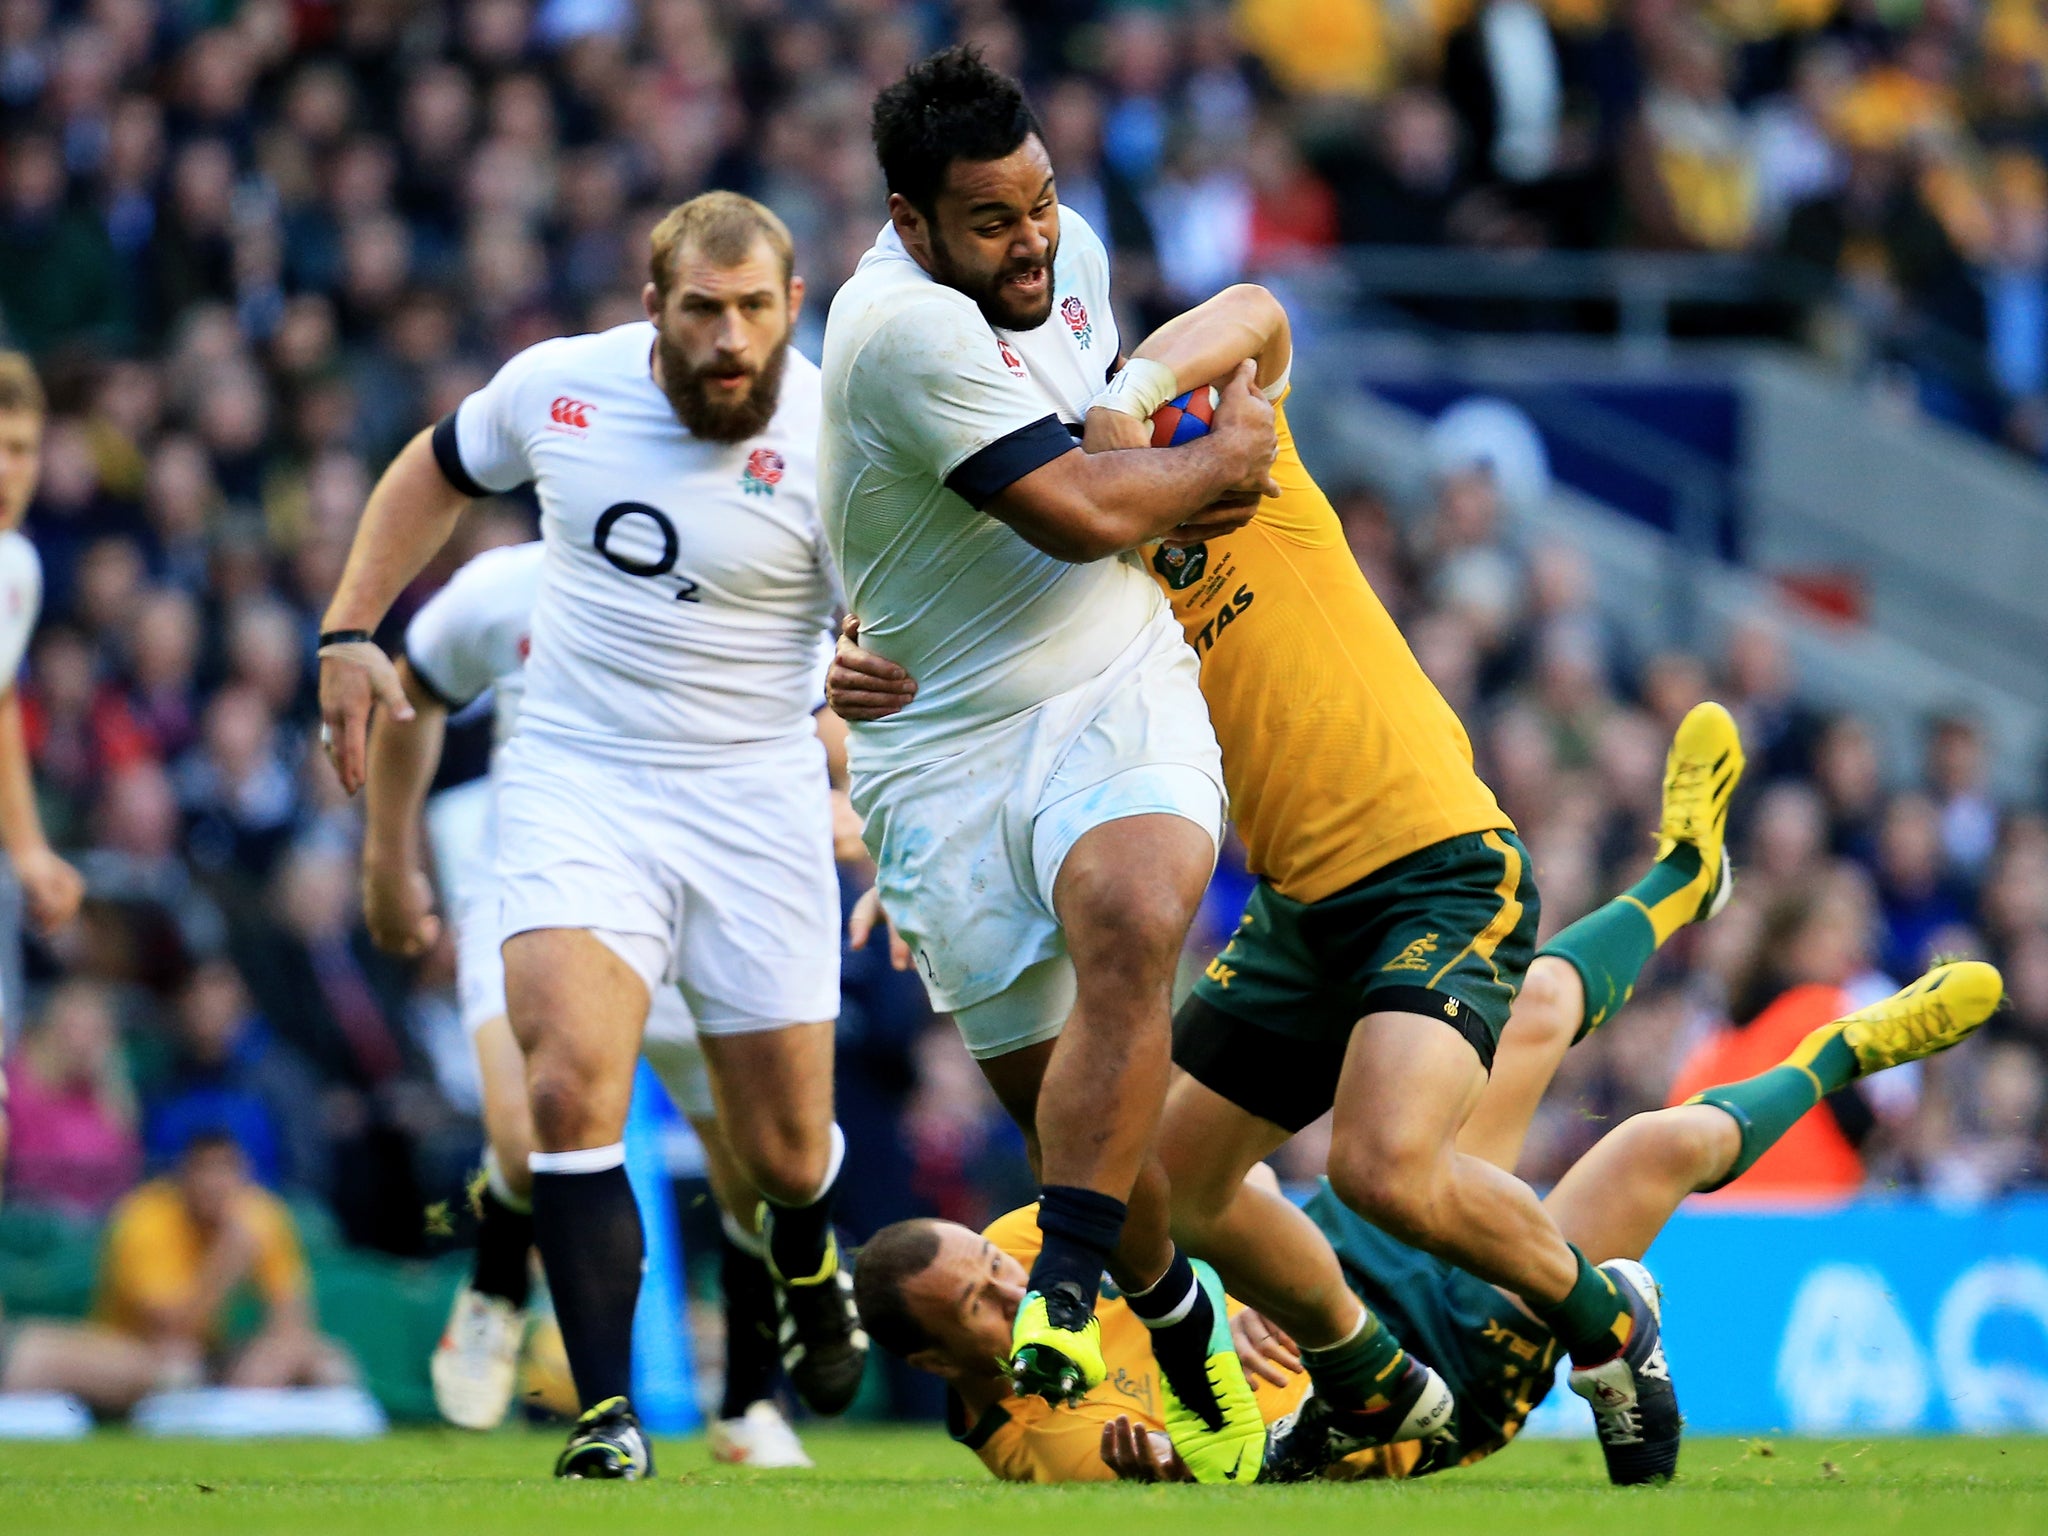 England number eight Billy Vunipola breaks clear if the Australian defence